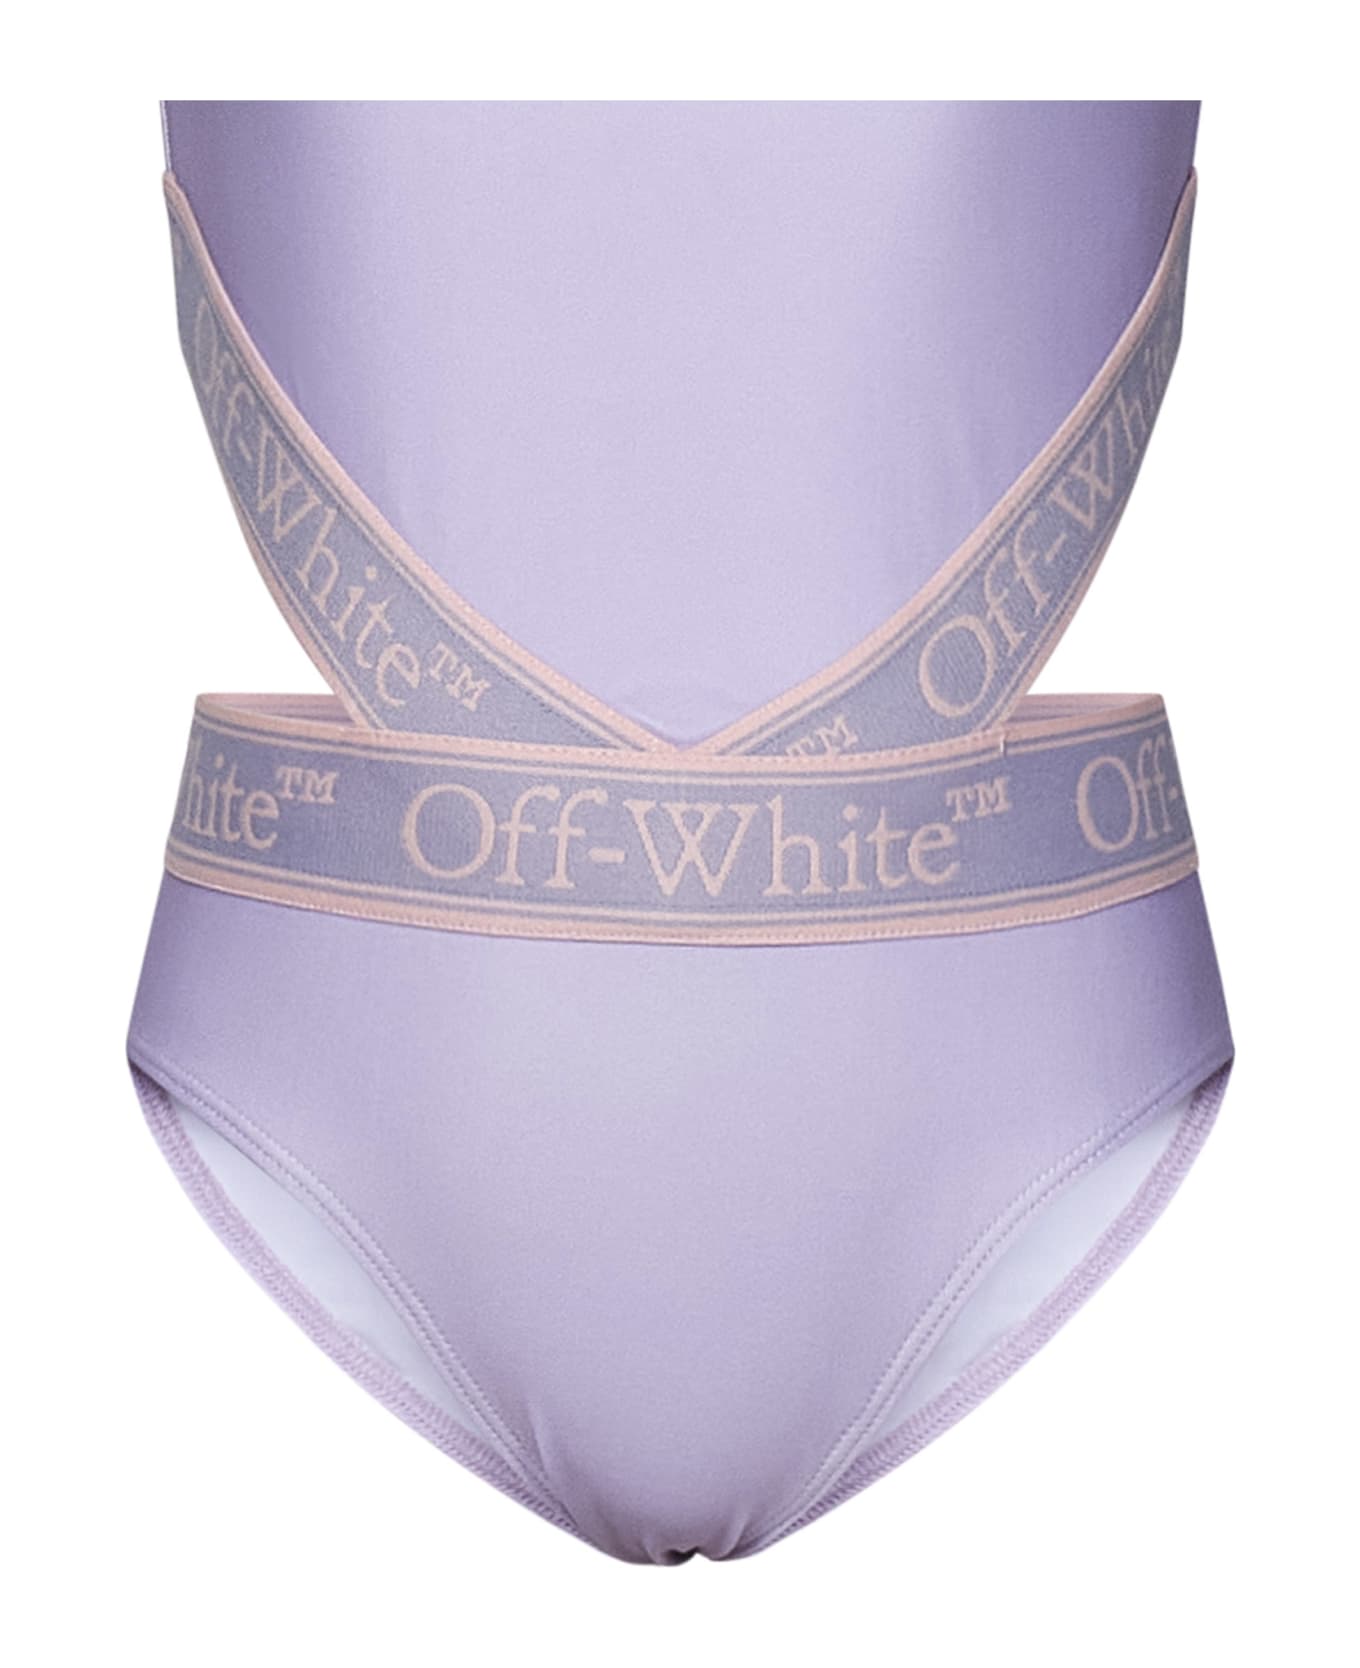 Off-White Kids Swimsuit - Lilac